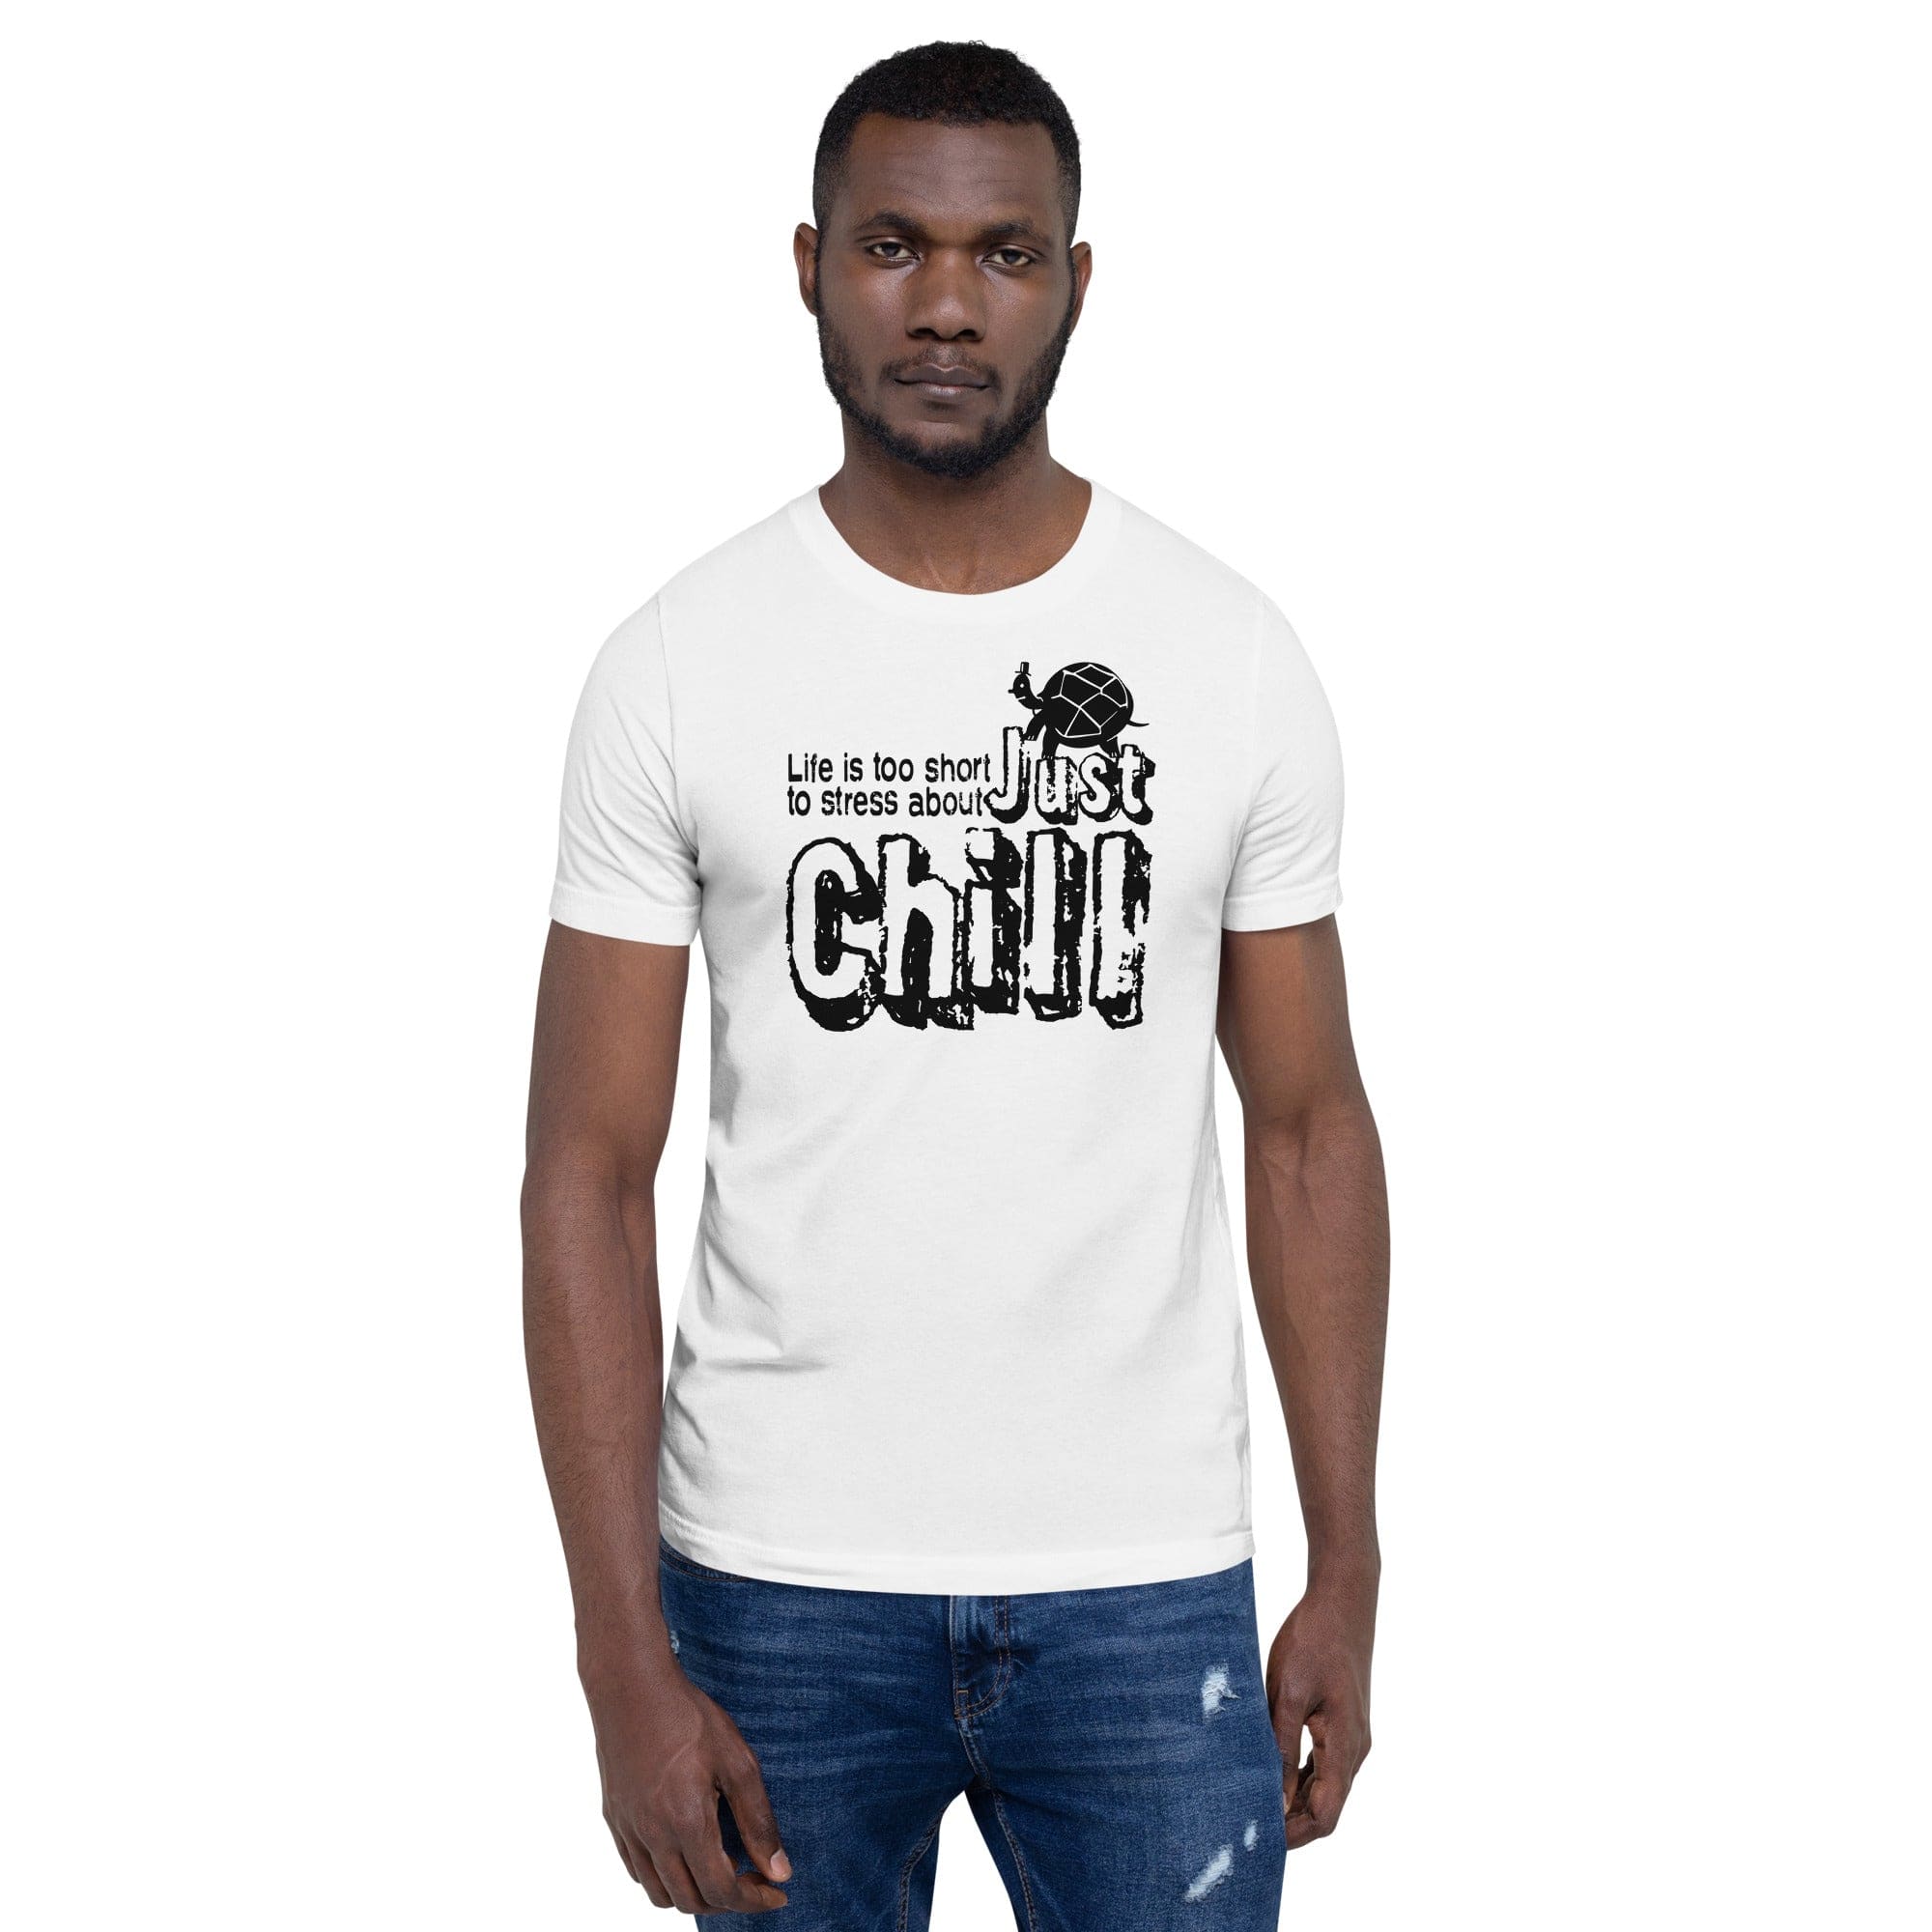 Shop Just CHILL Inspirational Quote Mindfulness Living Tee Shirt, T-shirts, USA Boutique